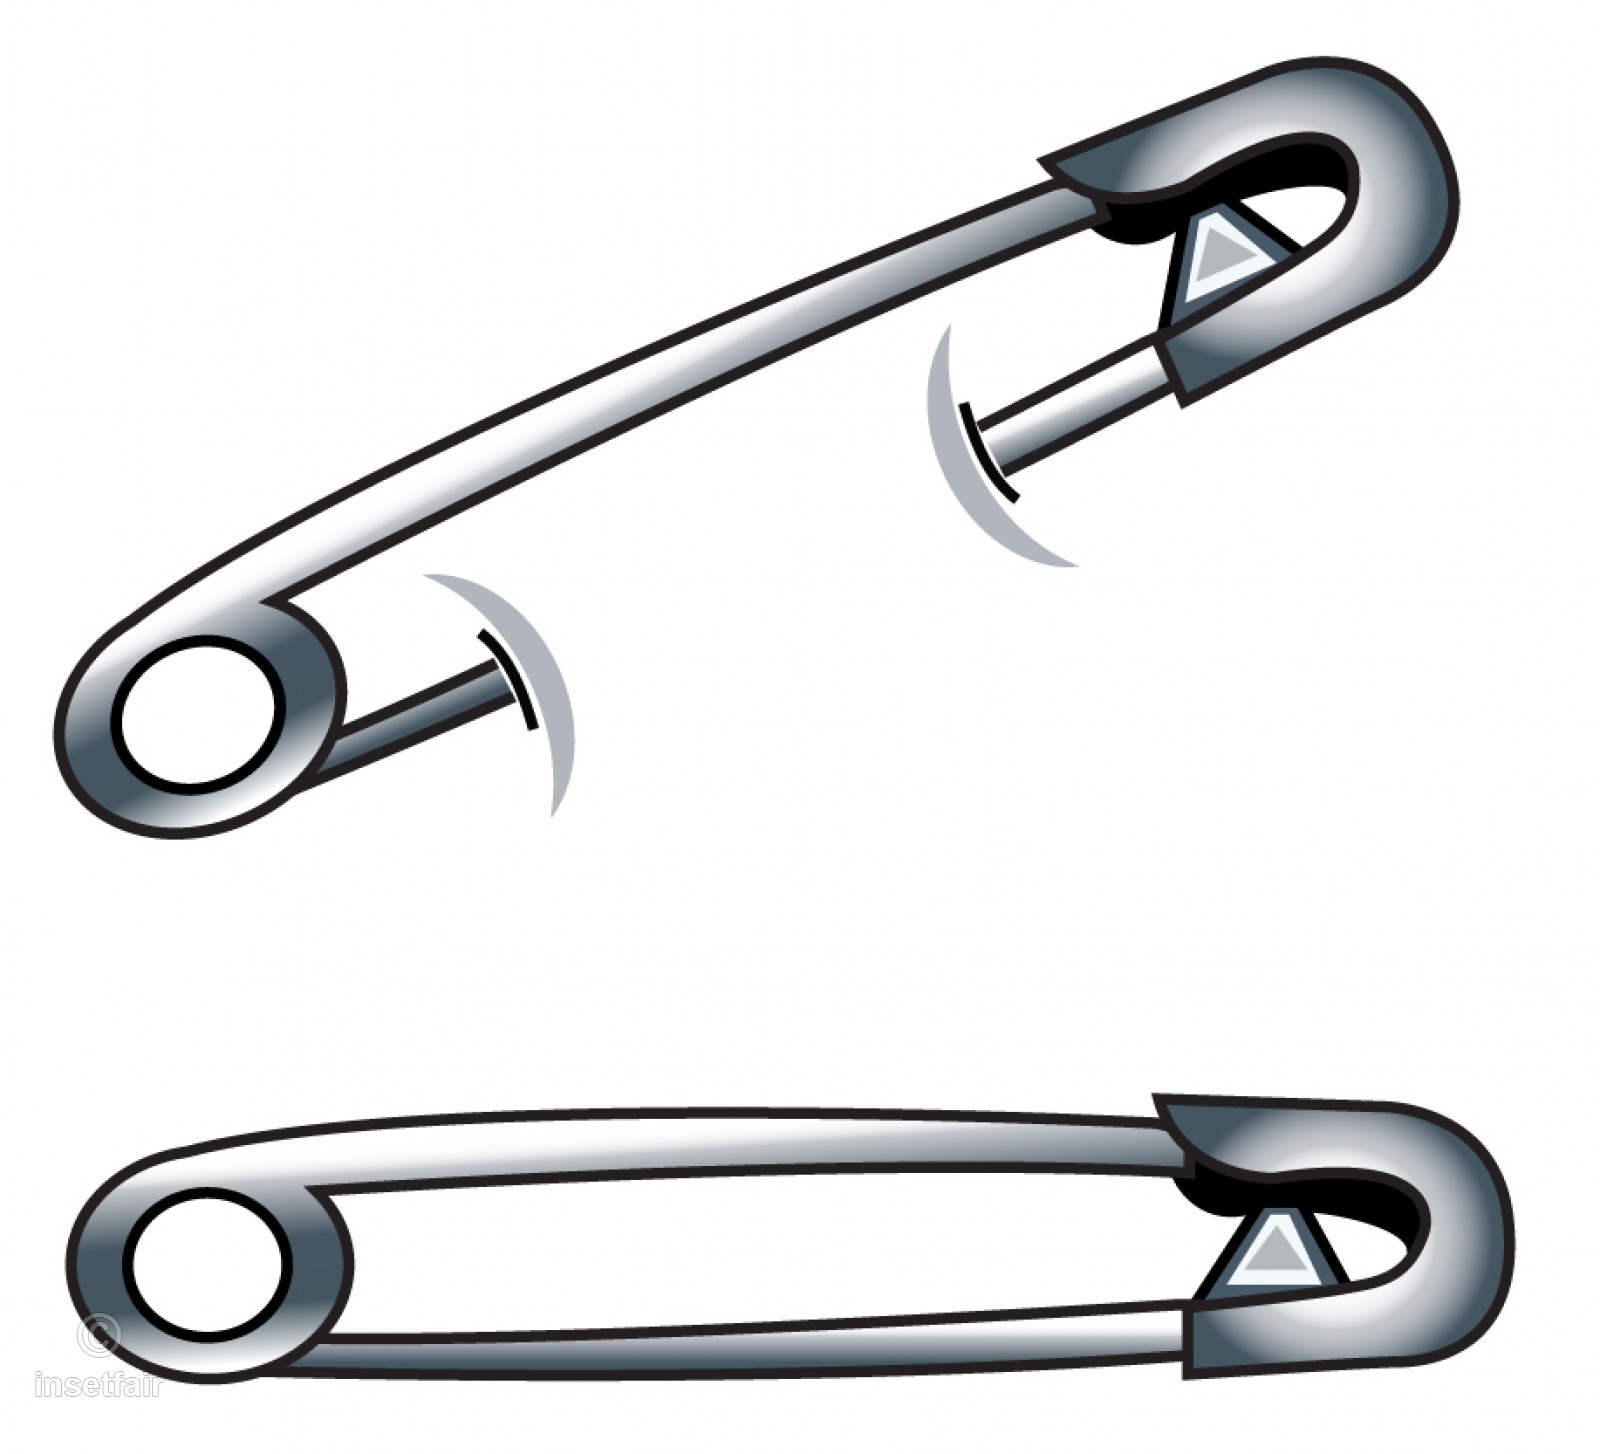 Safety pin cartoon clipart for free download